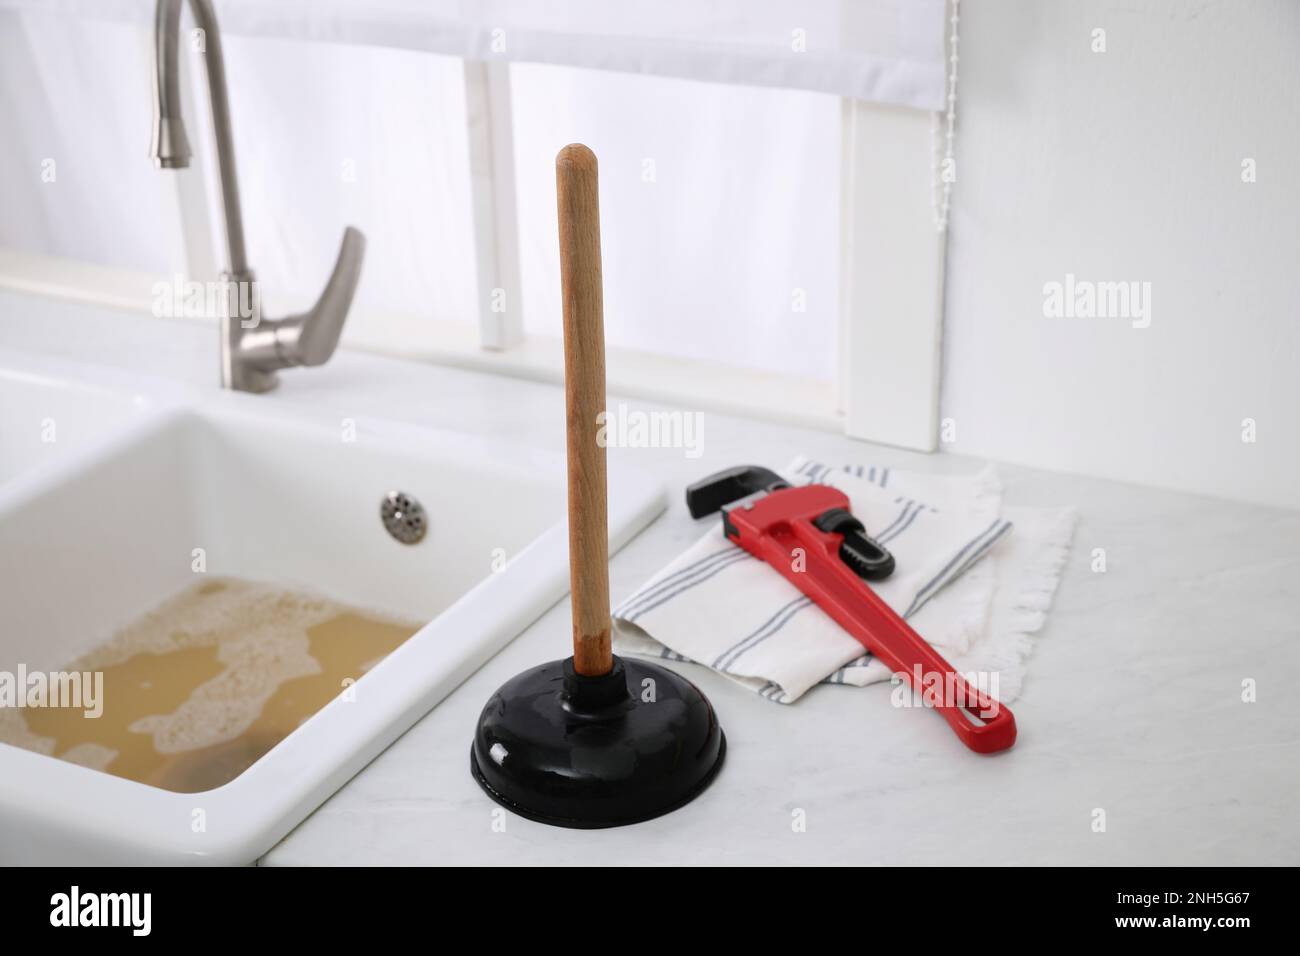 https://c8.alamy.com/comp/2NH5G67/plunger-pipe-wrench-and-towel-on-kitchen-counter-near-clogged-sink-2NH5G67.jpg